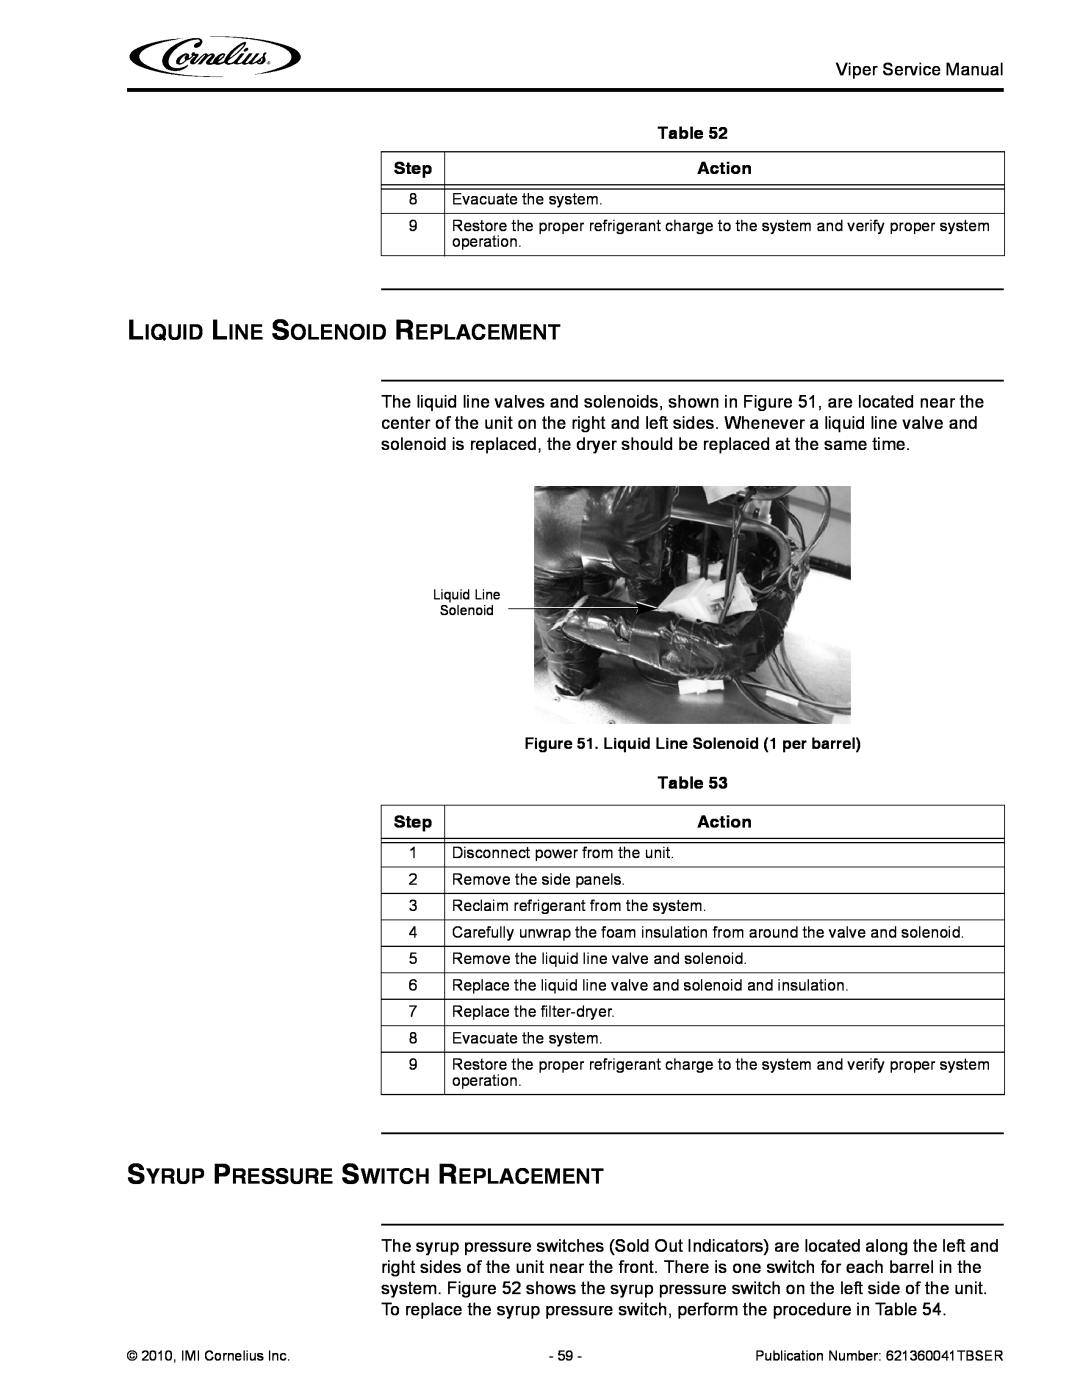 Cornelius 3 service manual Liquid Line Solenoid Replacement, Syrup Pressure Switch Replacement, Step, Action 